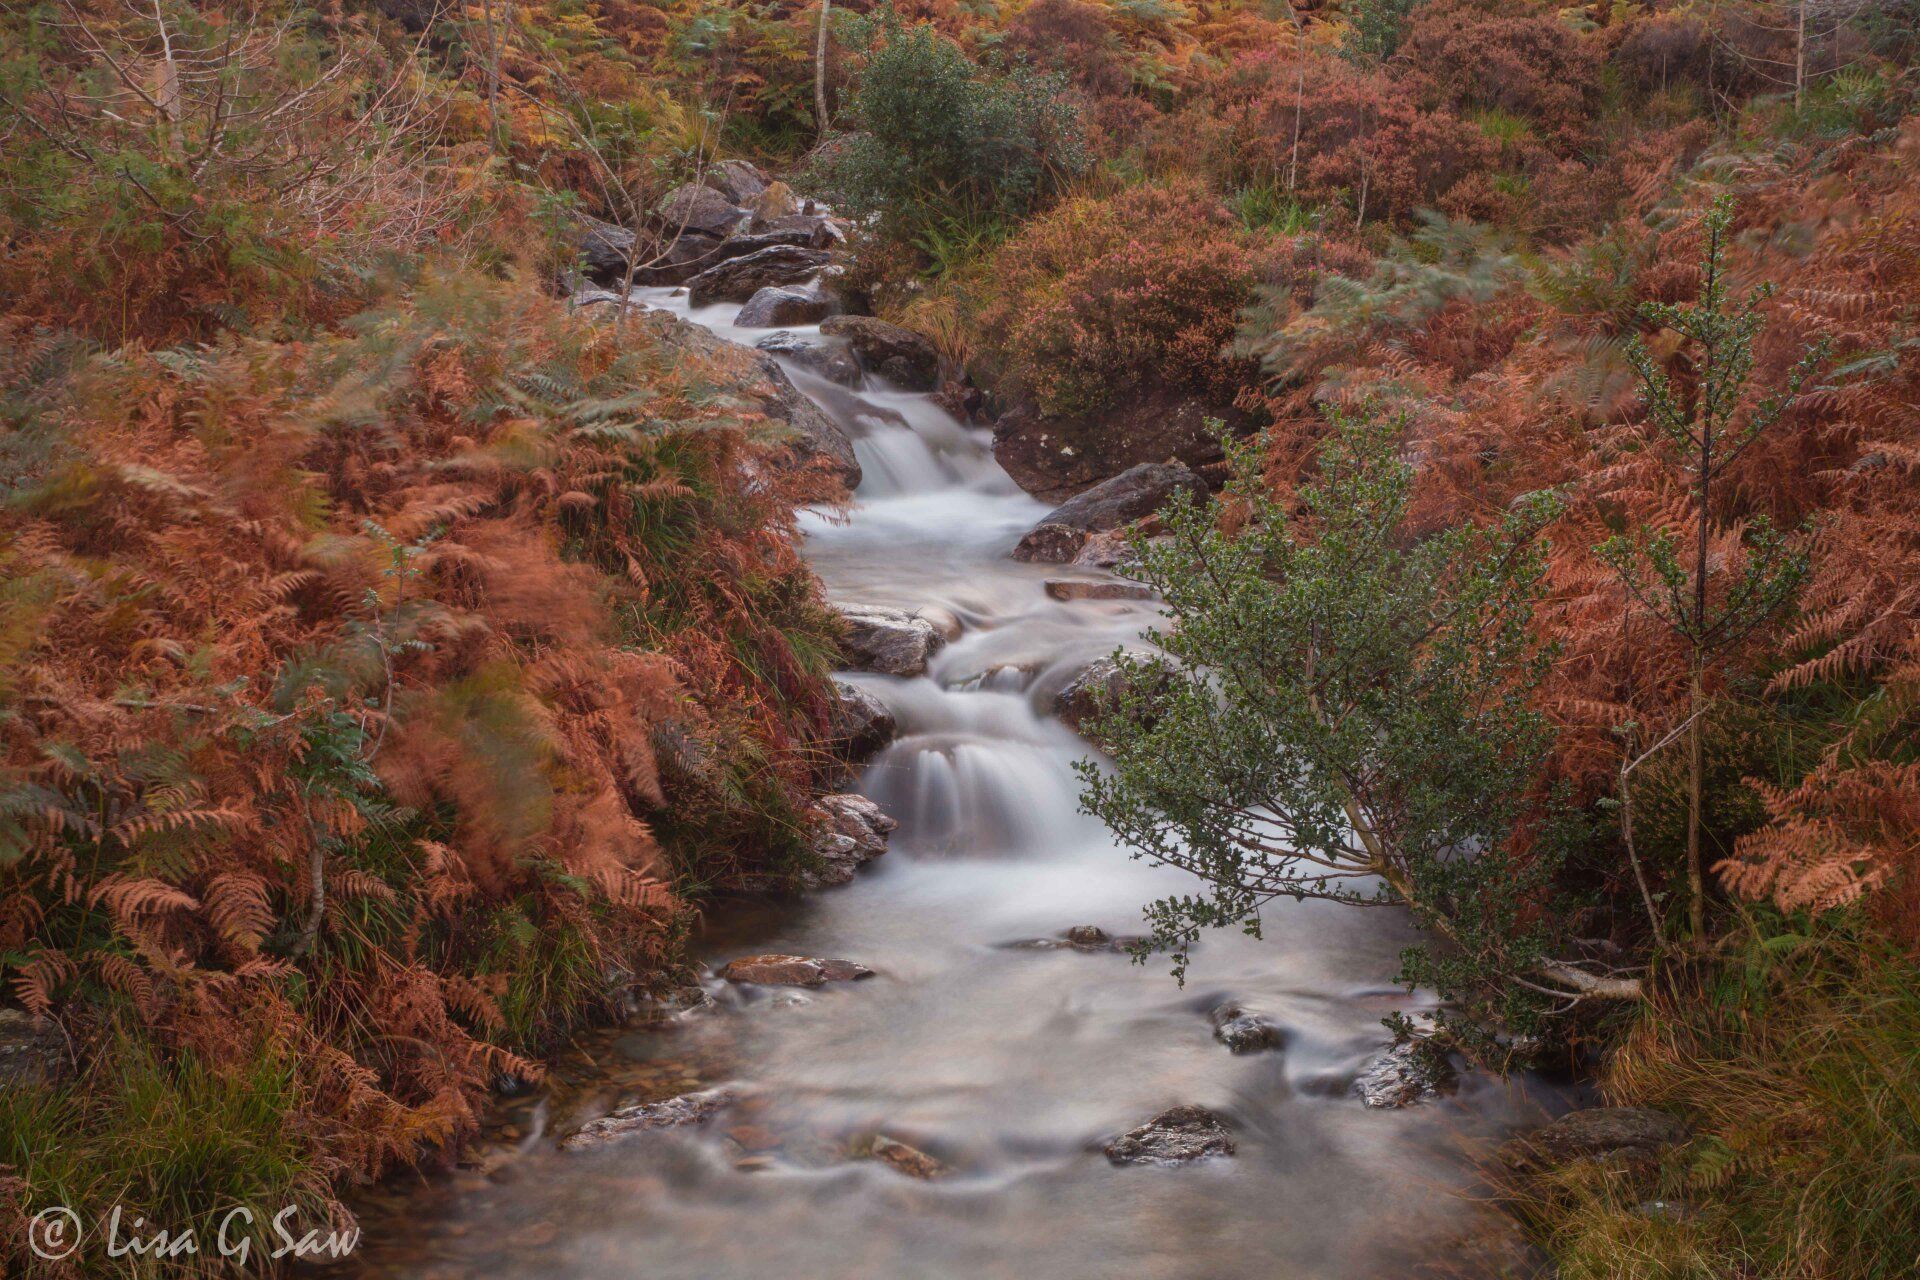 River cascading over rocks with slow shutter speed